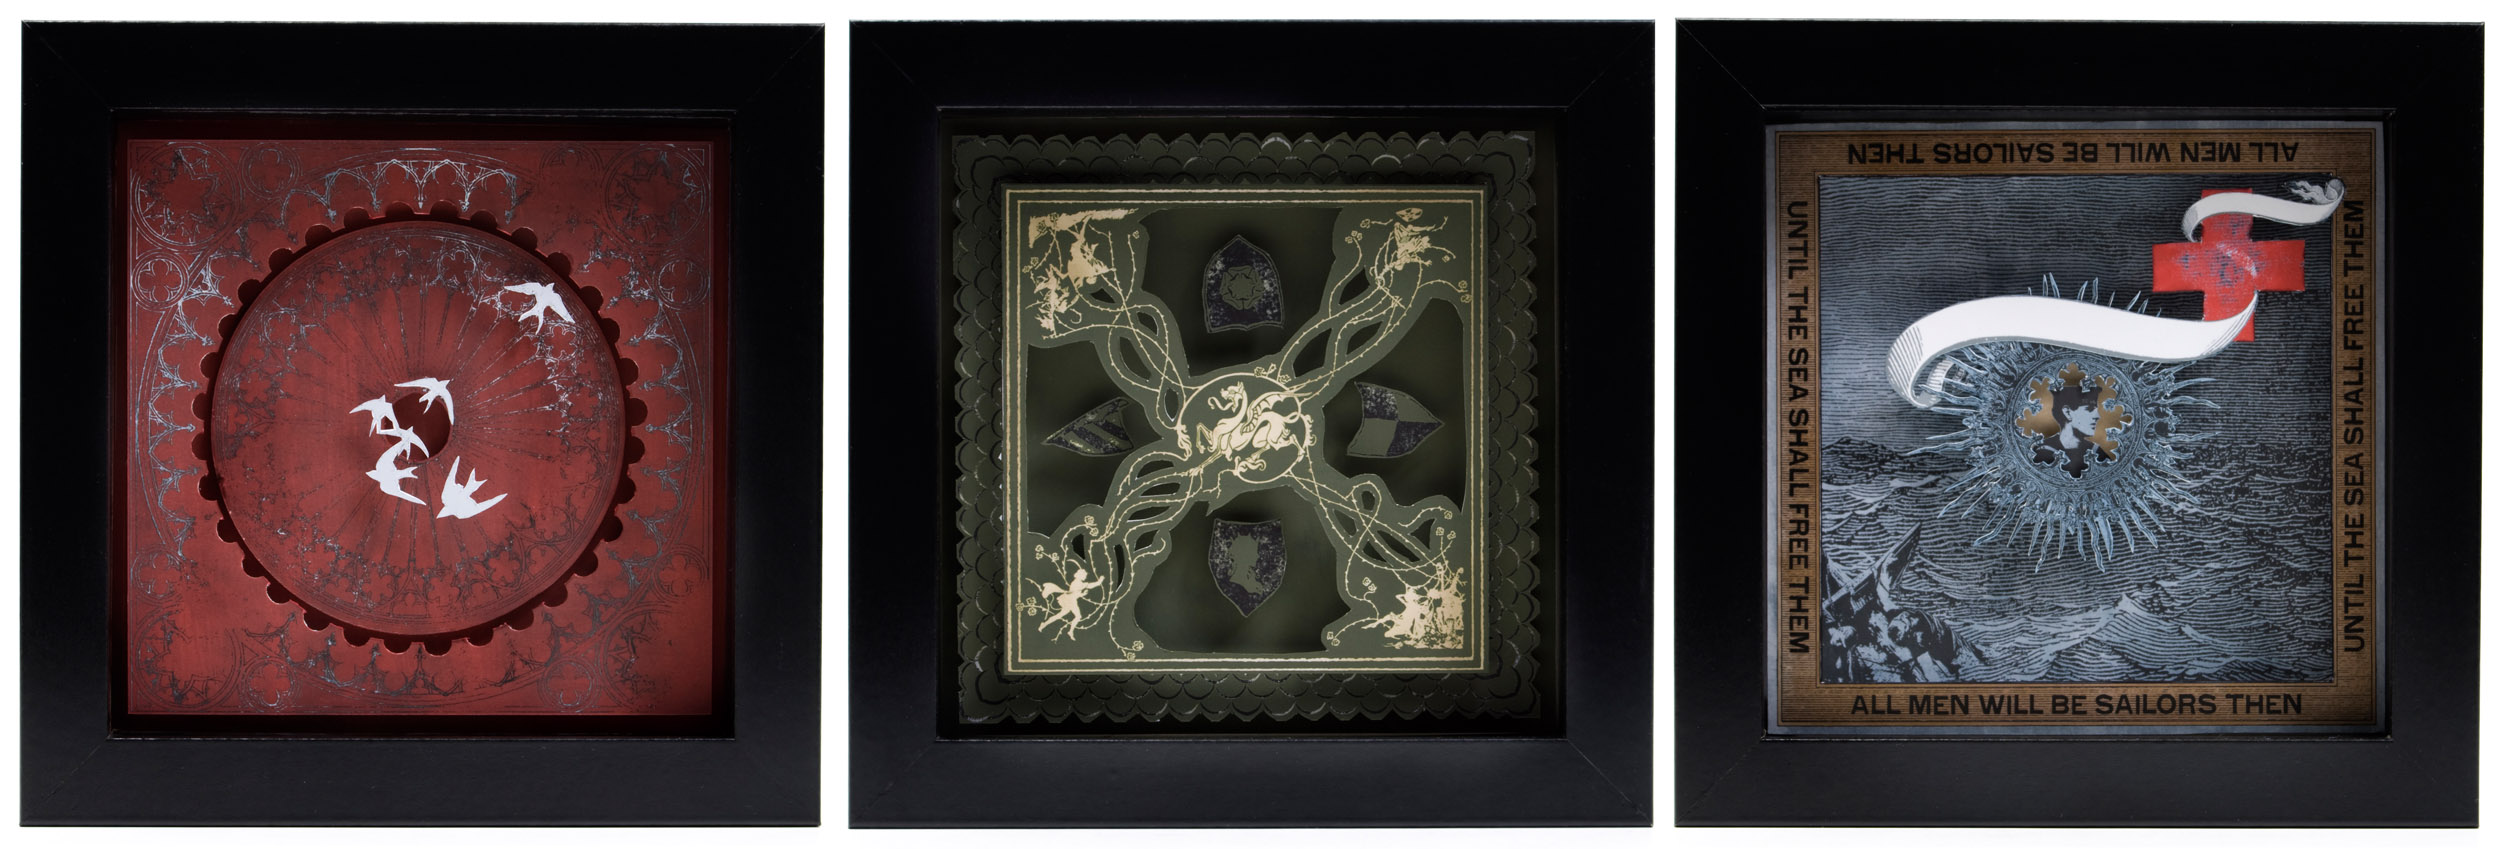 Pauper Voile designs as small shadow boxes